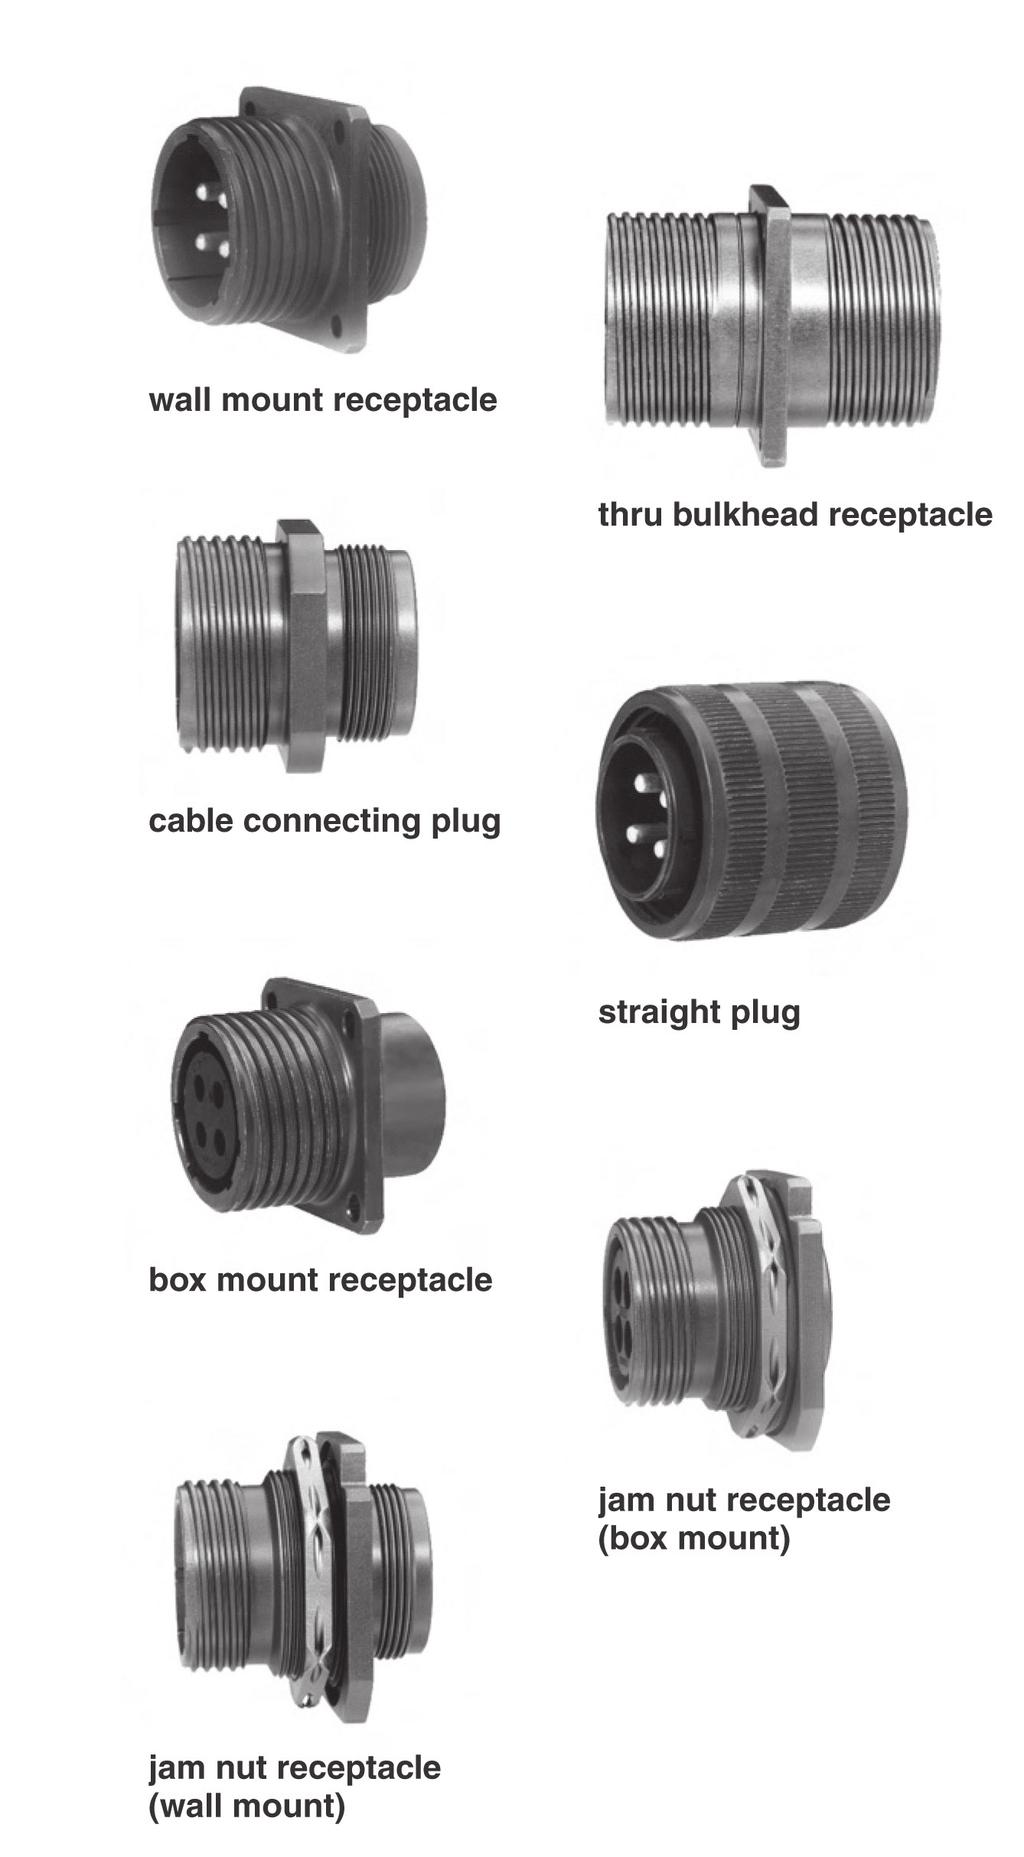 ext3 eavy uty ylindrical onnectors I-T-22992, QW ext3 QW eries eavy uty cylindrical connectors have been designed to reliably deliver power and control in environments unsuitable for less rugged